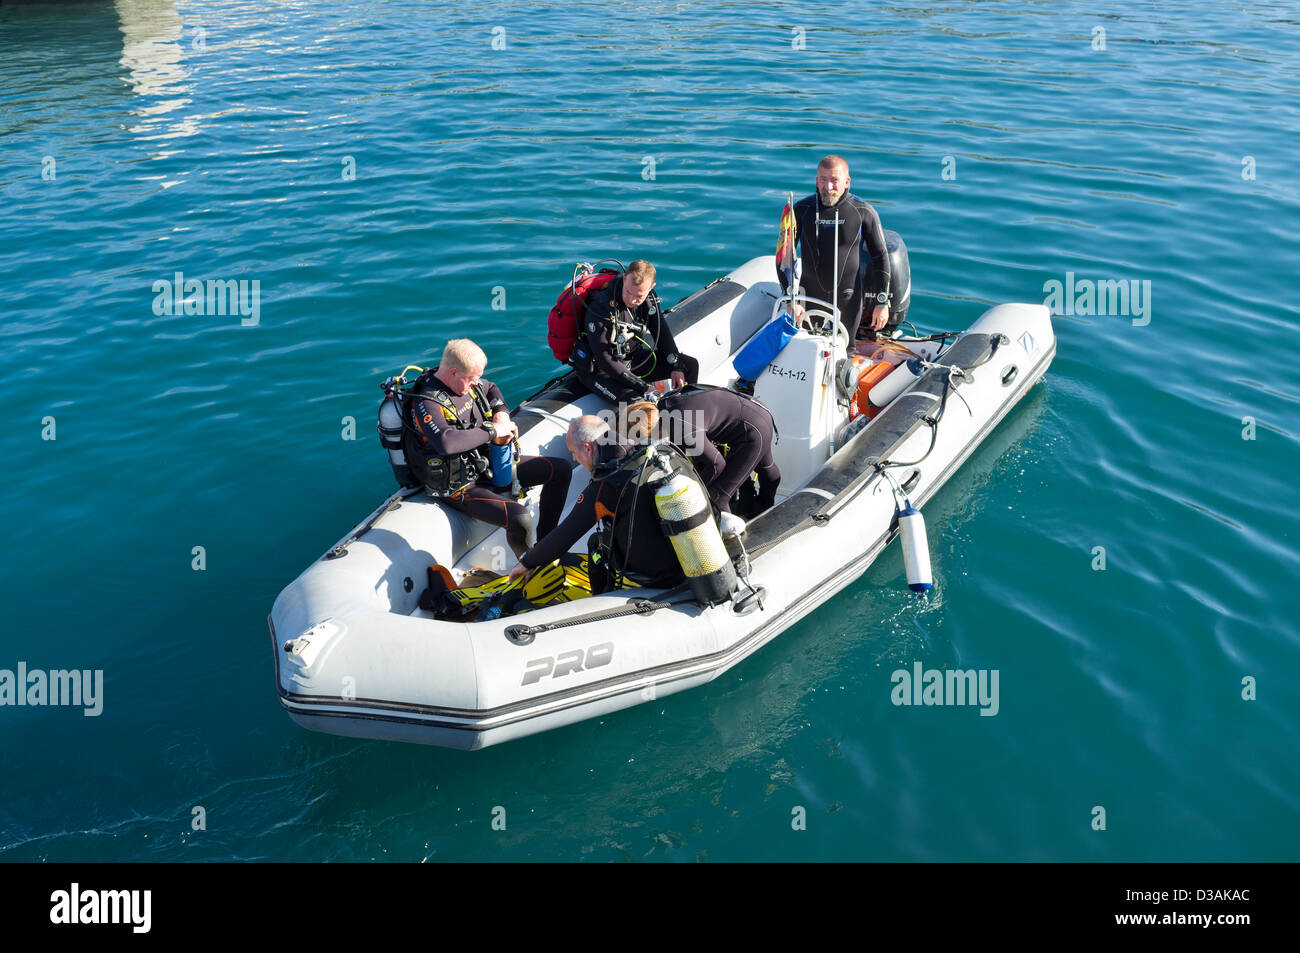 Divers getting ready to go on a dive leaving the harbour in a rib, semi rigid inflatable boat, Playa San Juan, Tenerife, Stock Photo